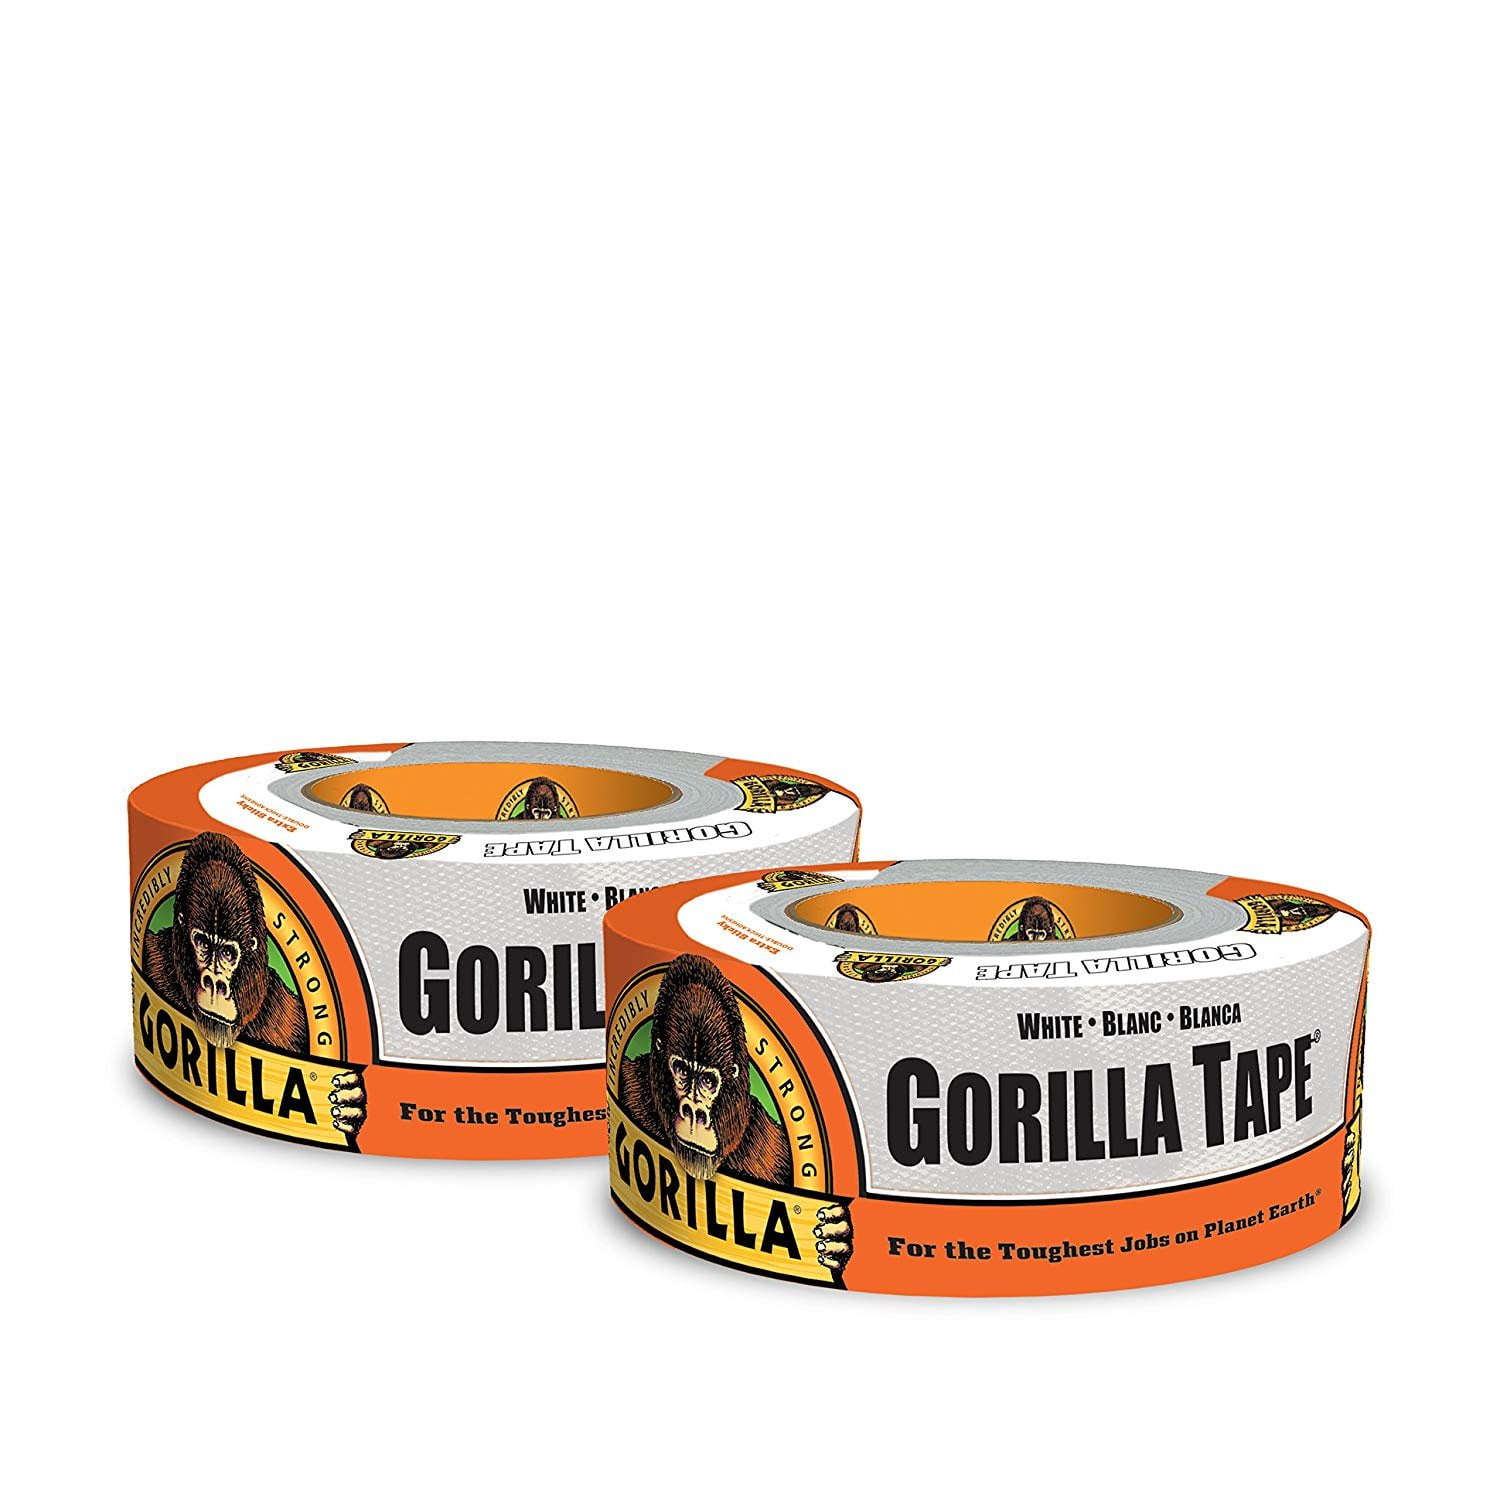 Black Gorilla Tape Double Thick Adhesive Tough Weather Resistant 1.88 in x 10 yd 